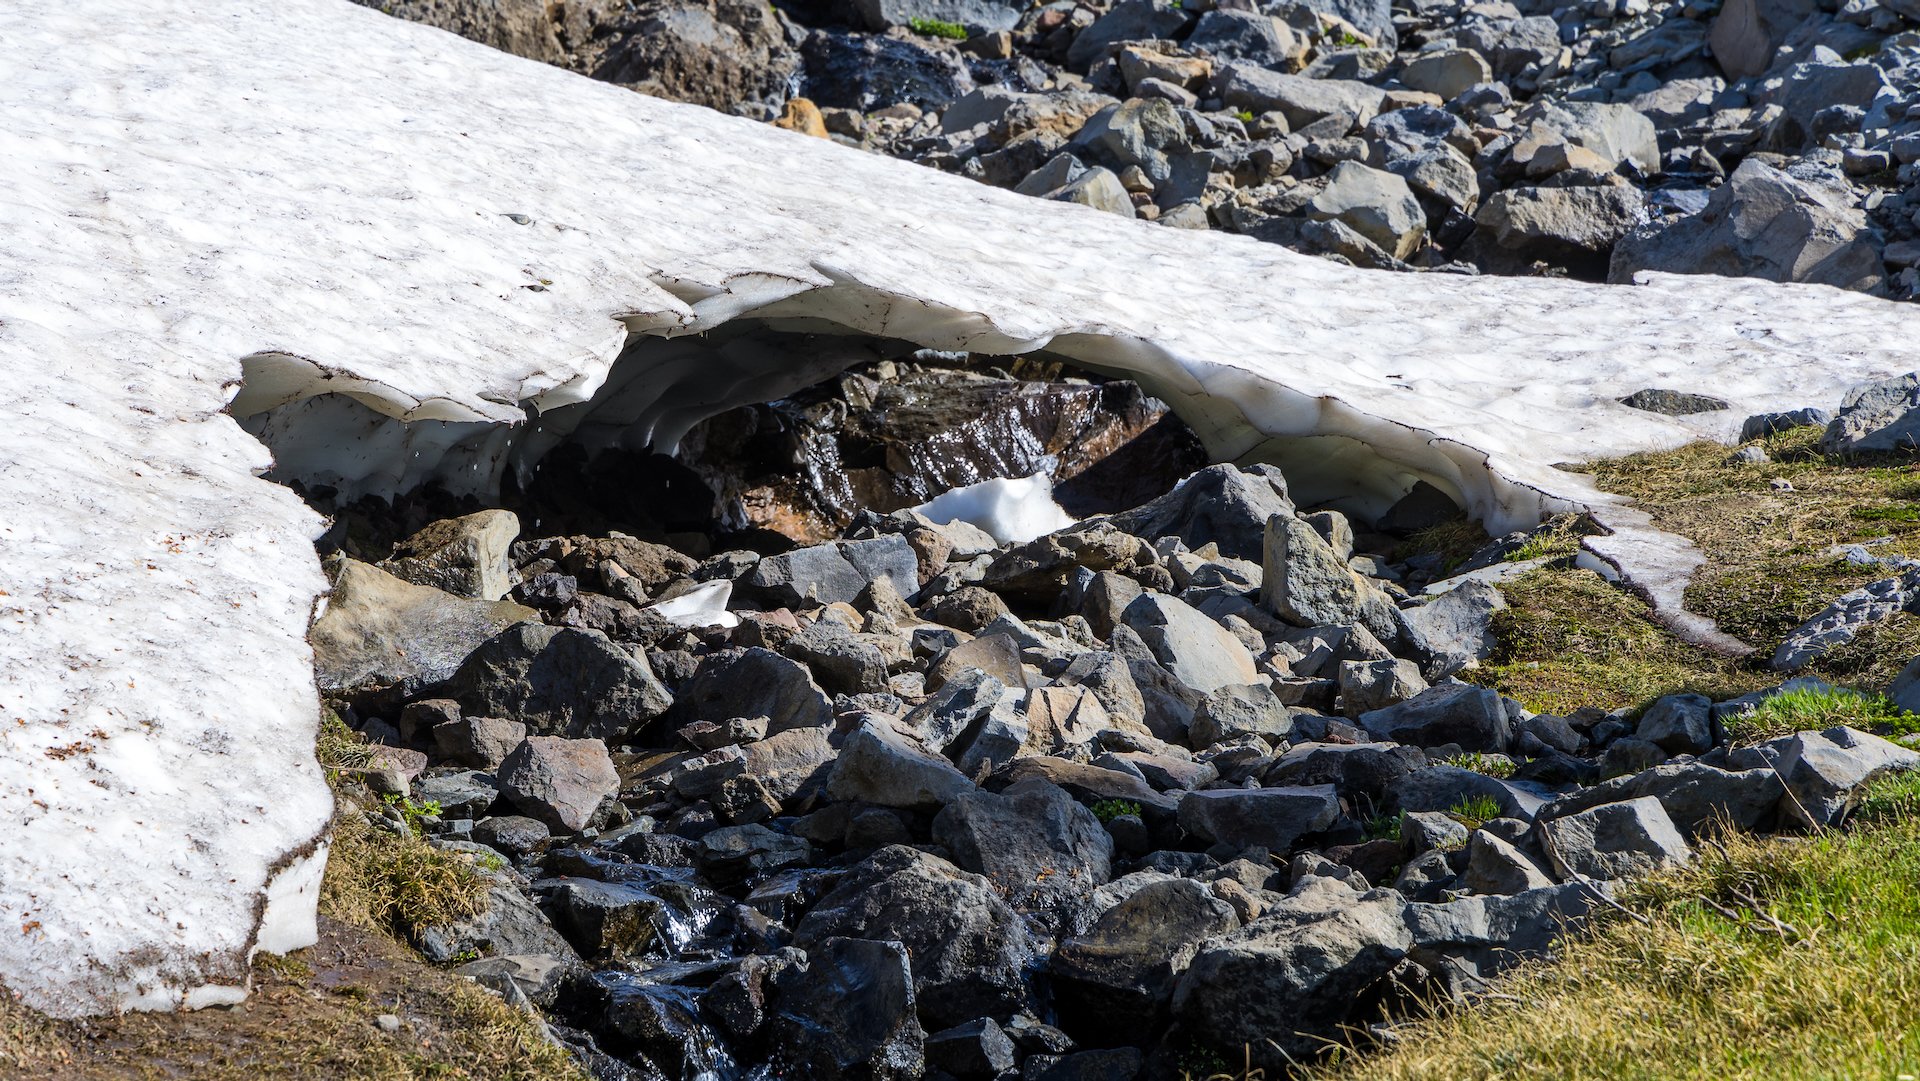  There was not a lot of snow down low, but there was this small snow bridge along the way. 